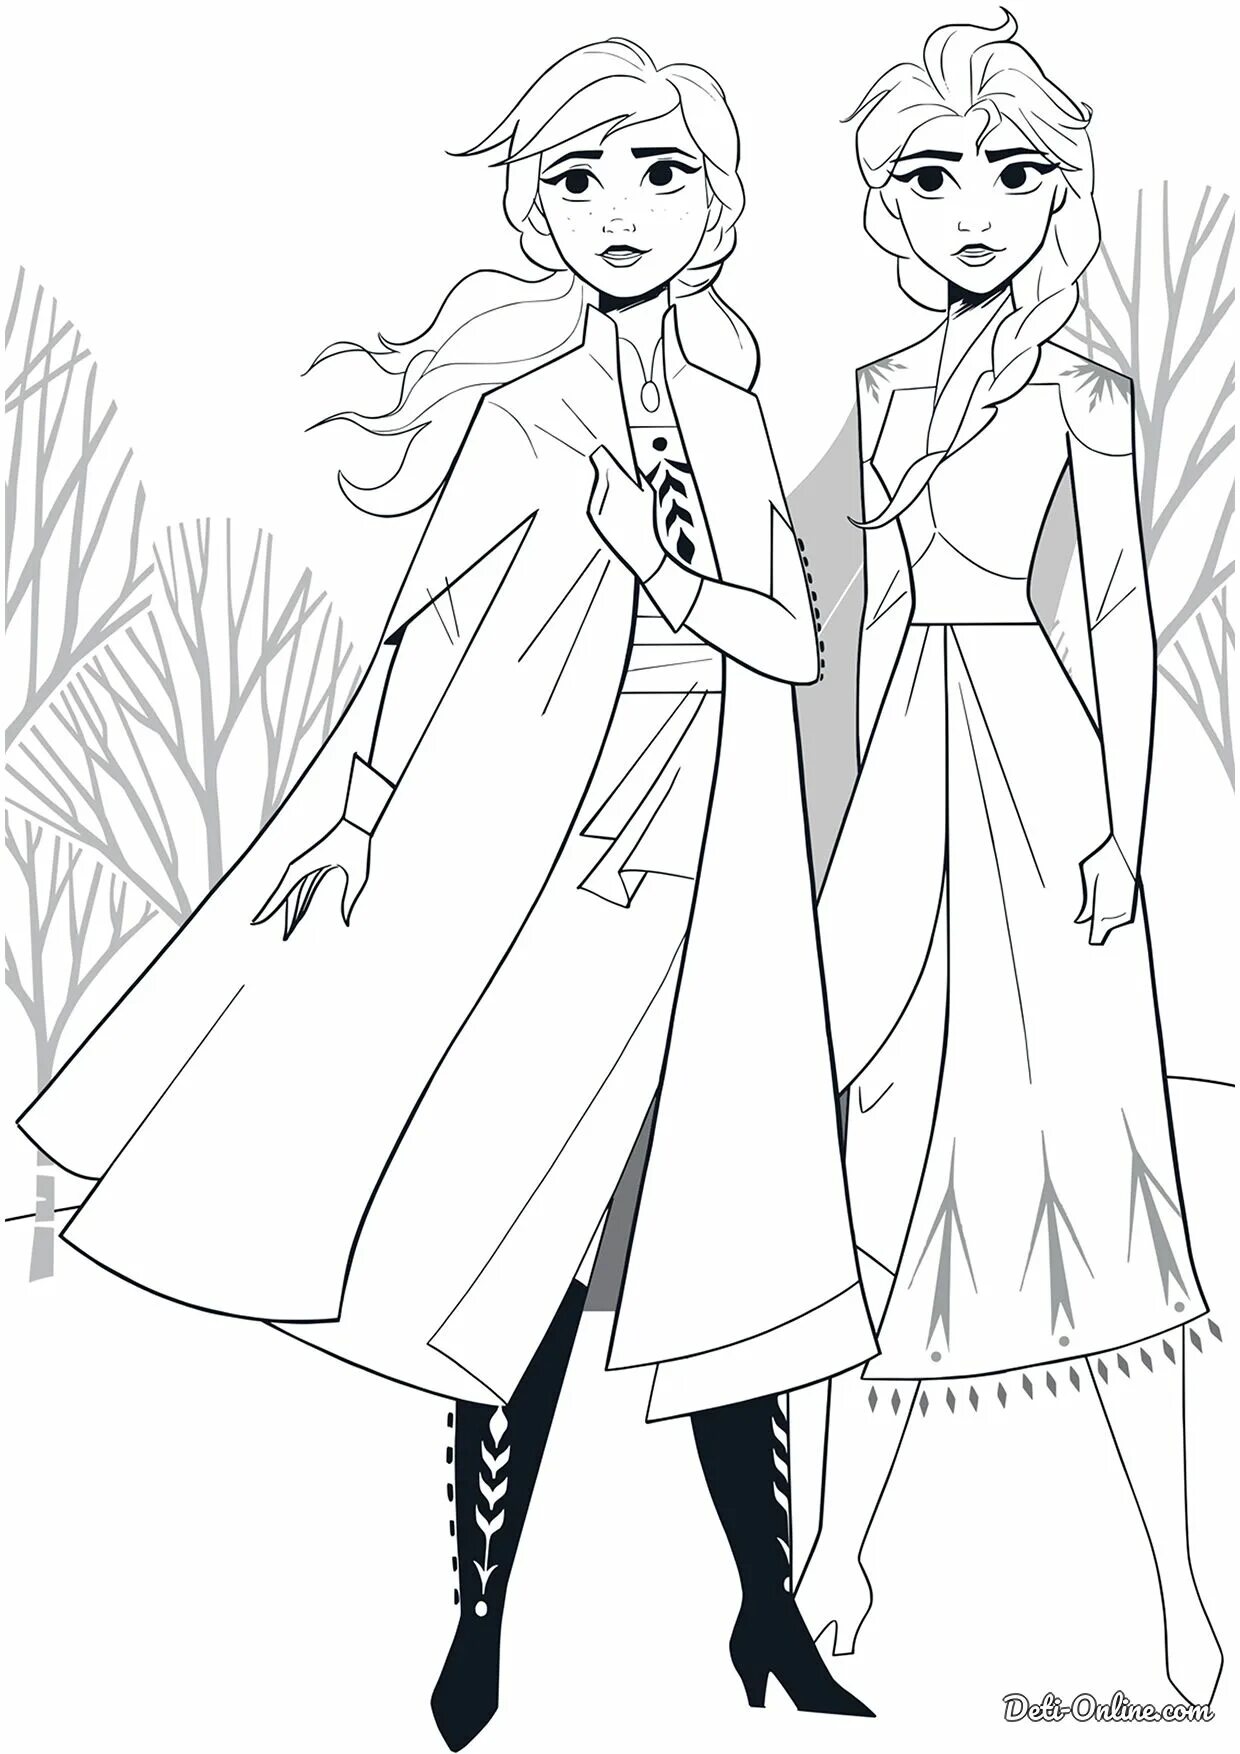 Elsa exotic coloring game for girls